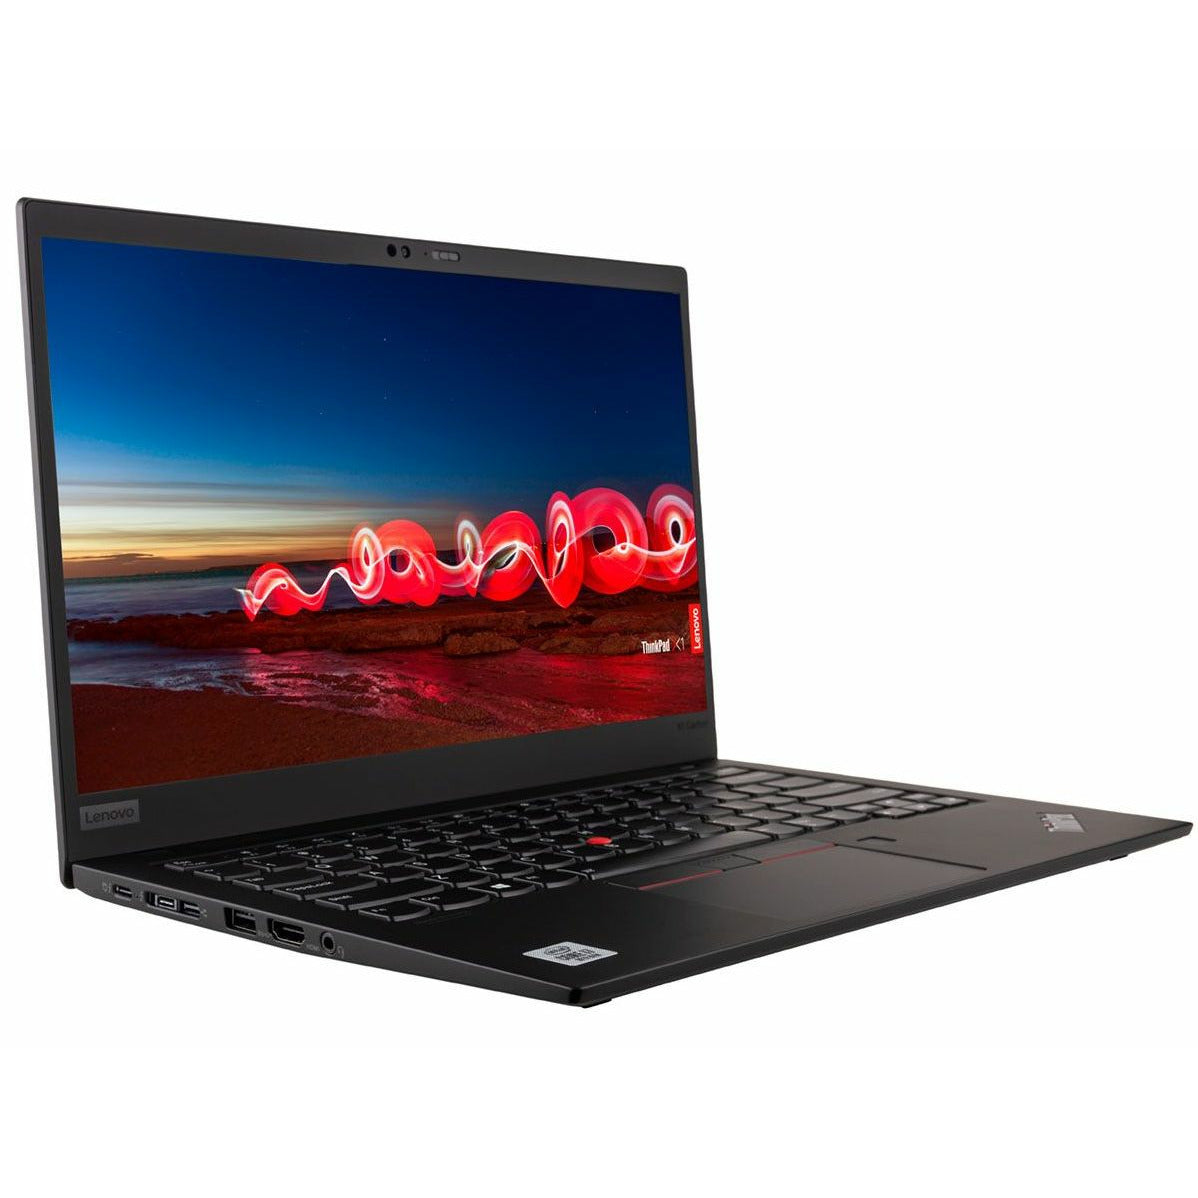 Lenovo ThinkPad X1 Carbon 8 gen Touch | i5 | 16GB | 256GB SSD  -  Brugt - Meget god stand